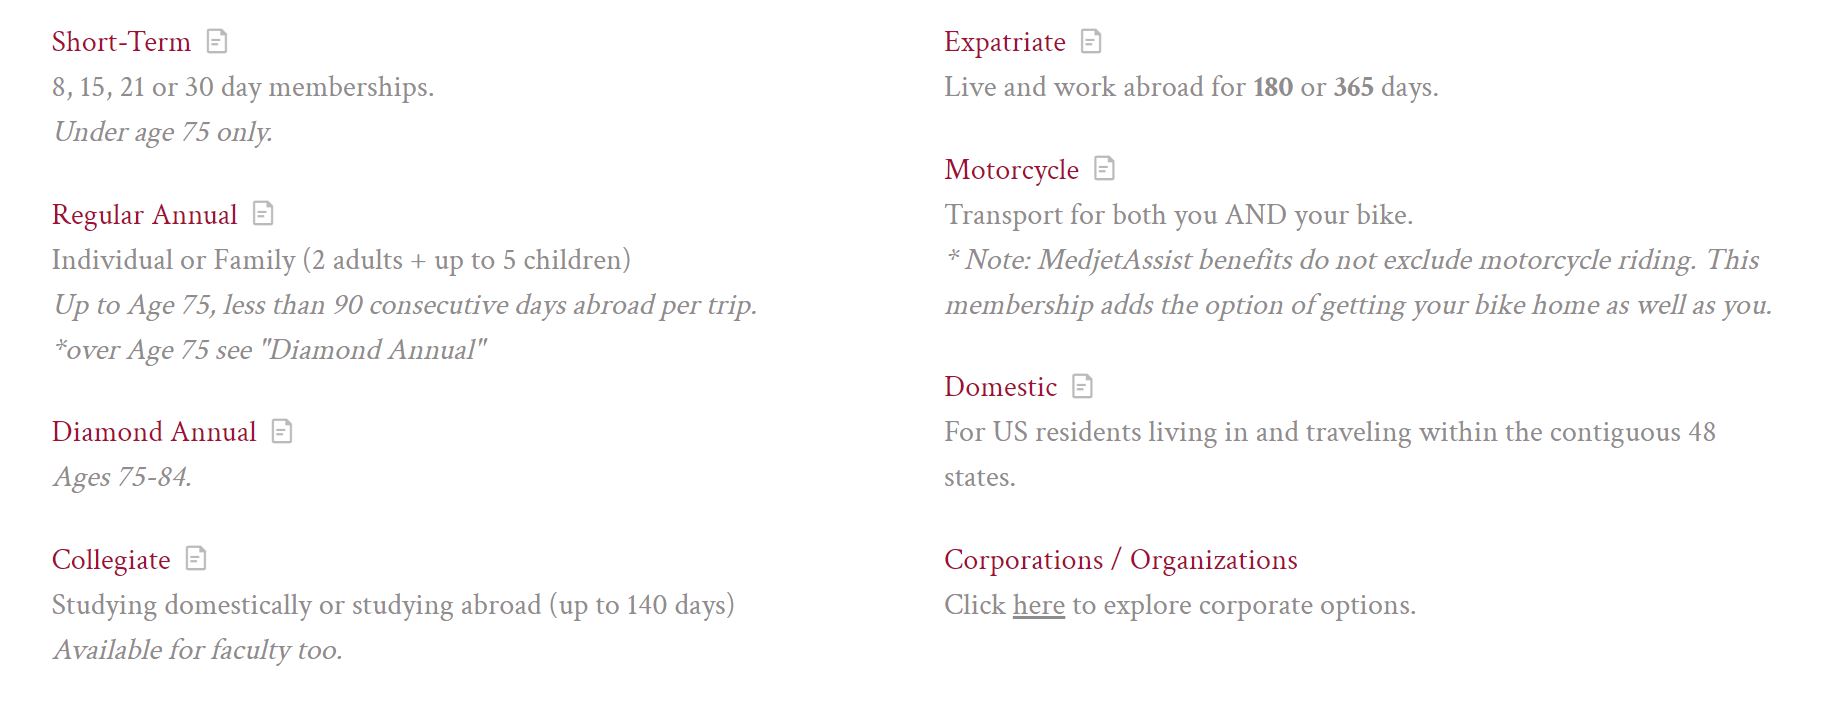 List of different plans offered by Medjet.